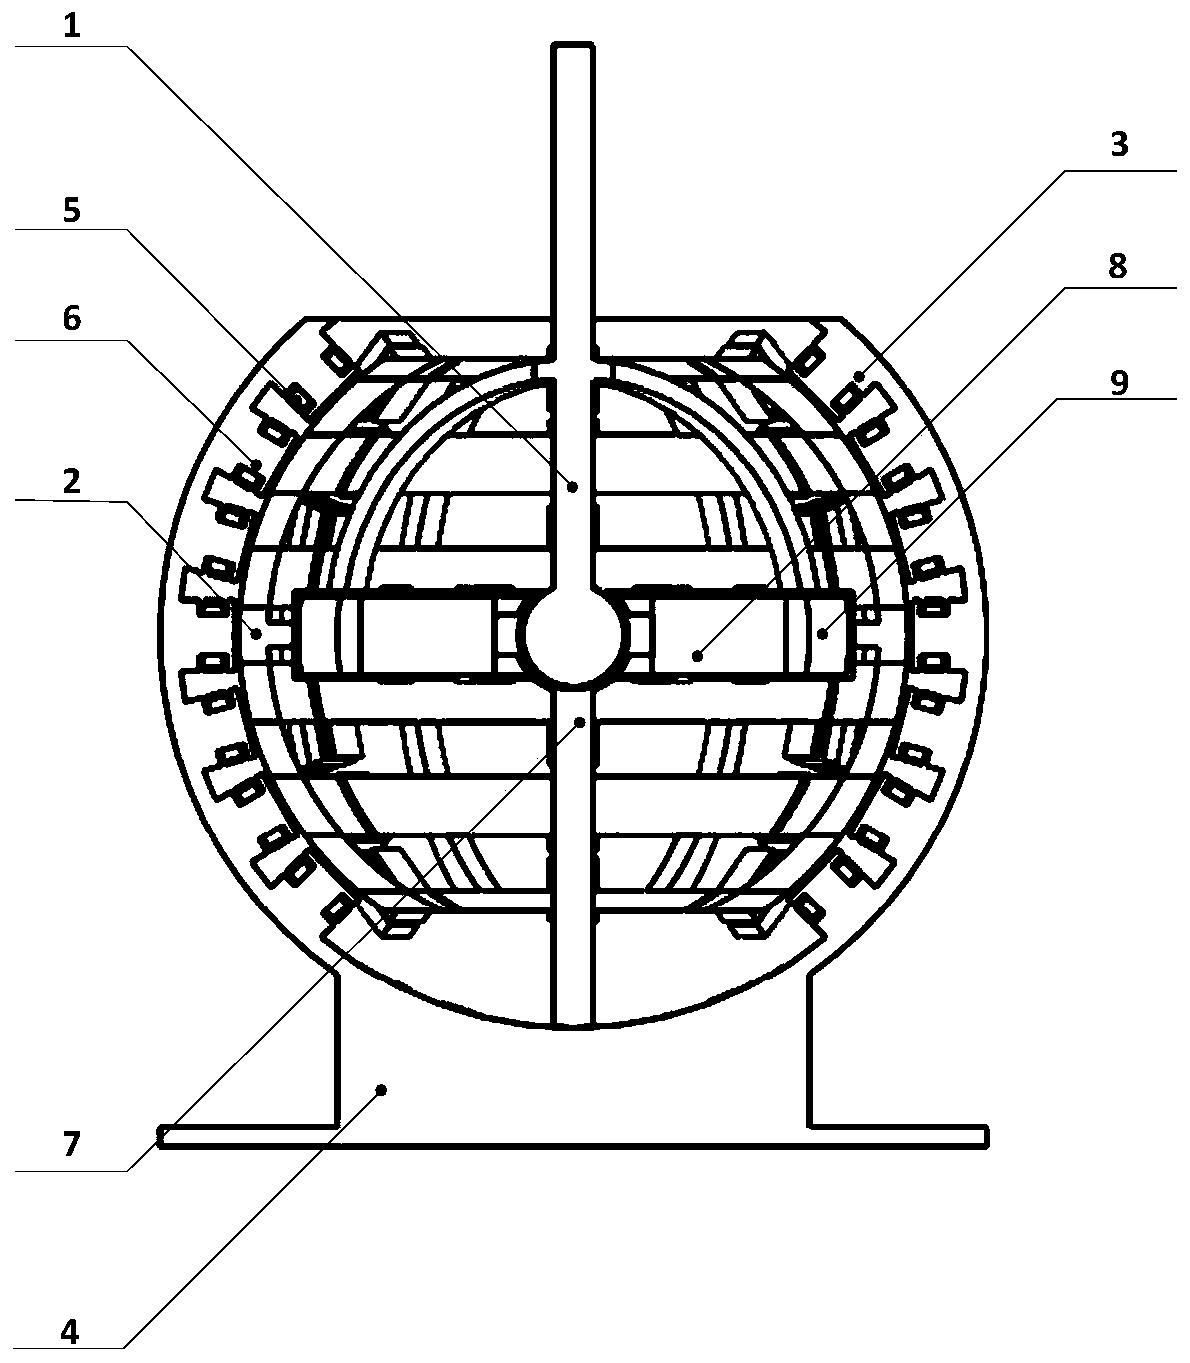 Three-degree-of-freedom motor with double-stator structure